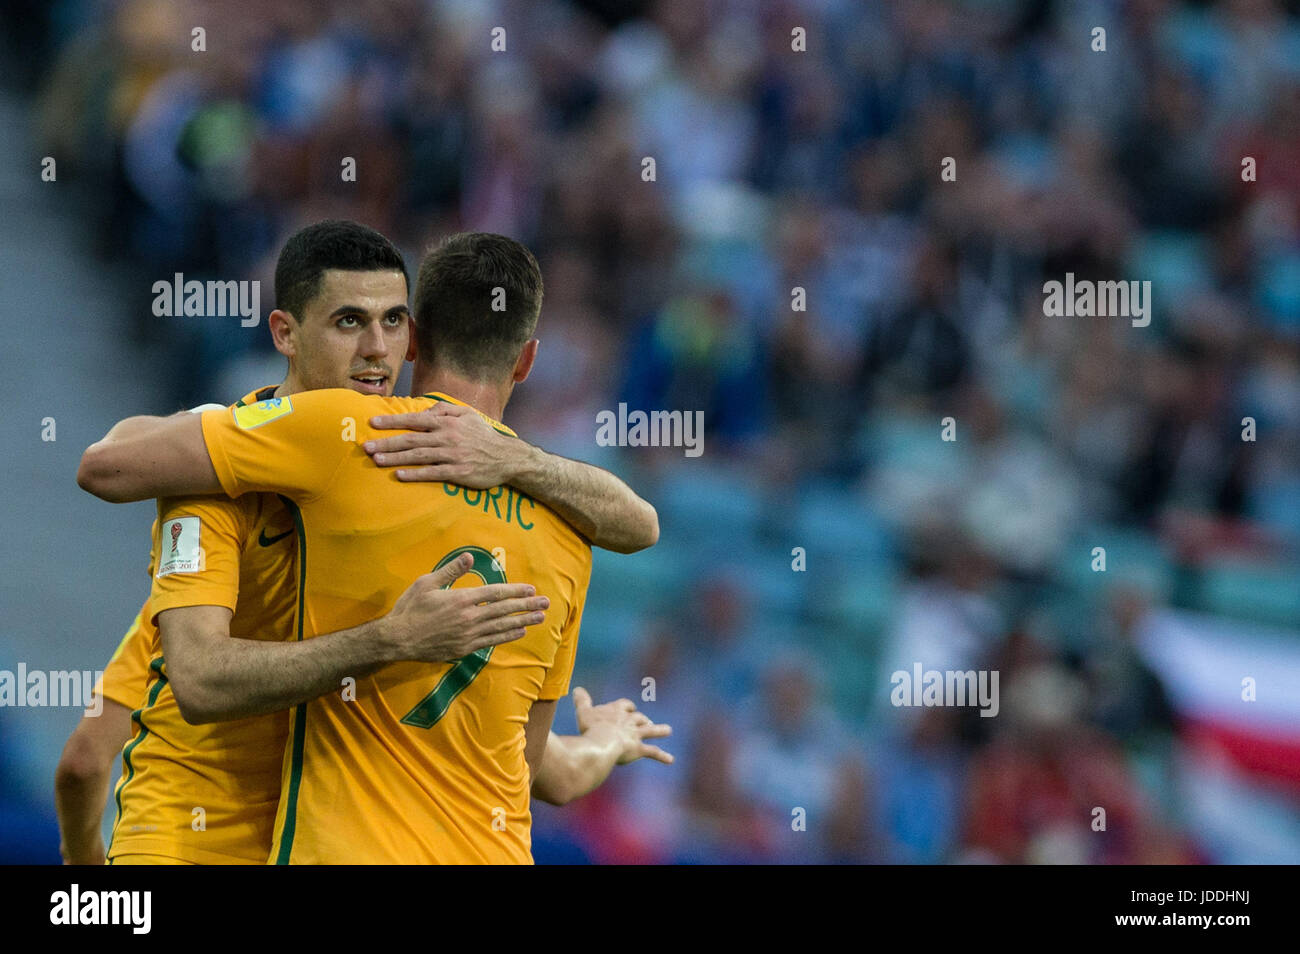 Sochi, Russia. 19th June, 2017. Tommy Rogic (L) of Australia celebrates after scoring with teammate Tomi Juric during the group B match between Australia and Germany of the 2017 FIFA Confederations Cup in Sochi, Russia, on June 19, 2017. Germany won 3-2. Credit: Wu Zhuang/Xinhua/Alamy Live News Stock Photo